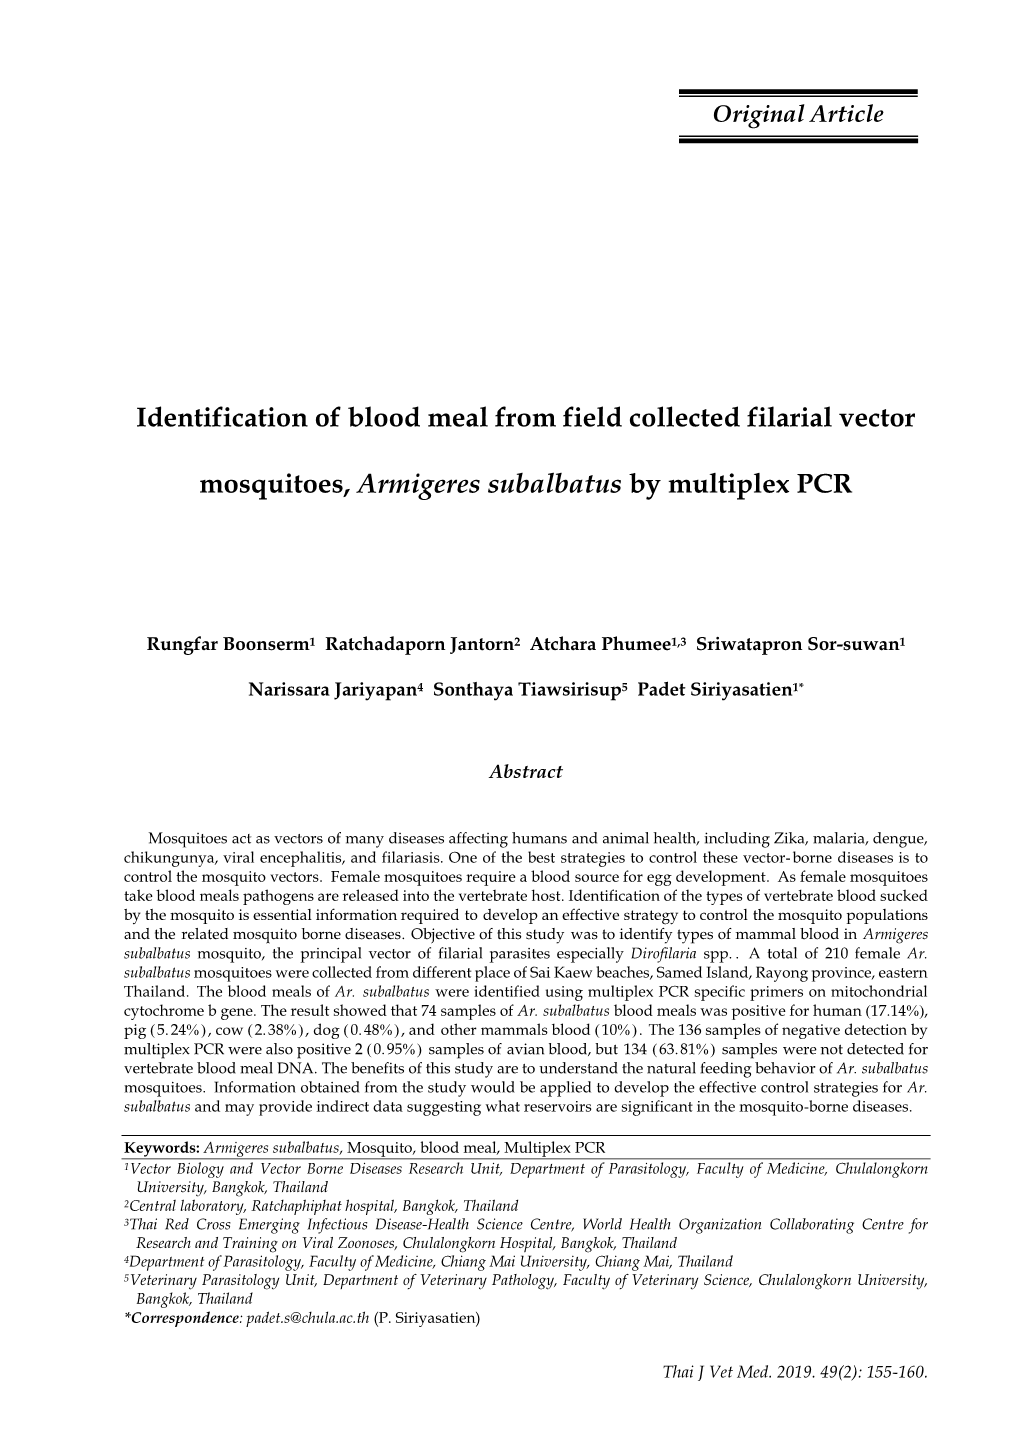 Identification of Blood Meal from Field Collected Filarial Vector Mosquitoes